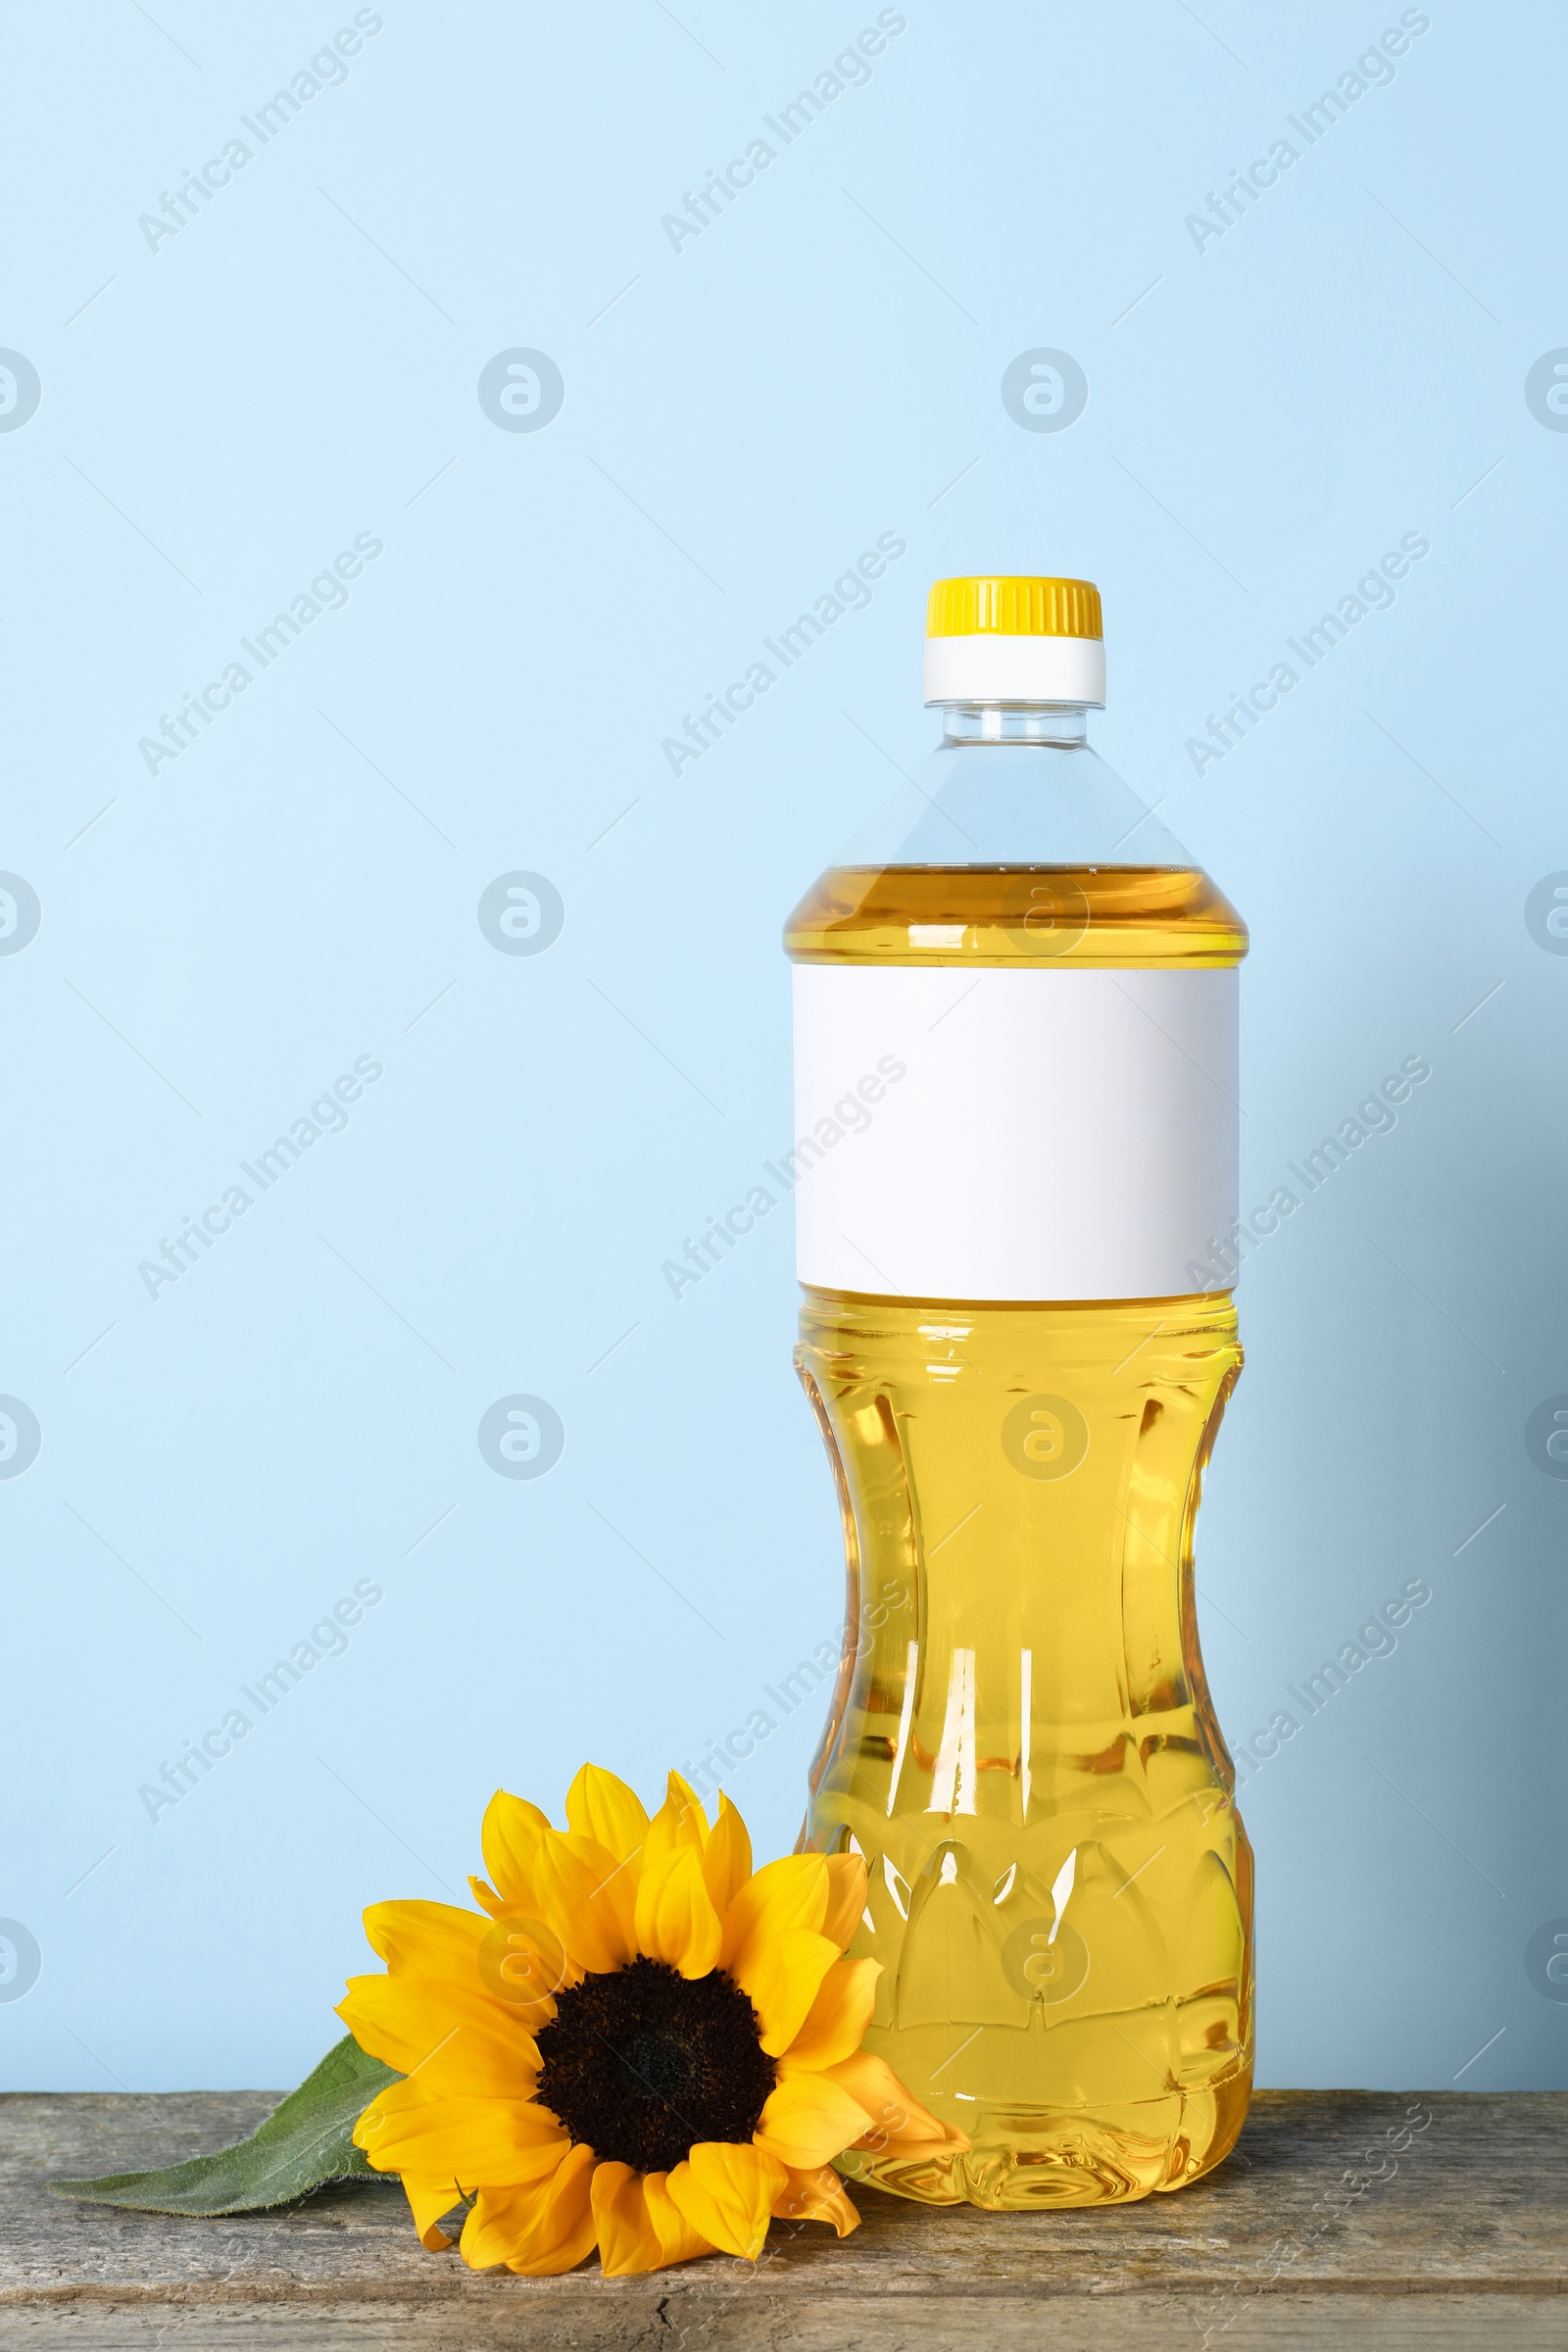 Photo of Bottle of cooking oil and sunflower on wooden table